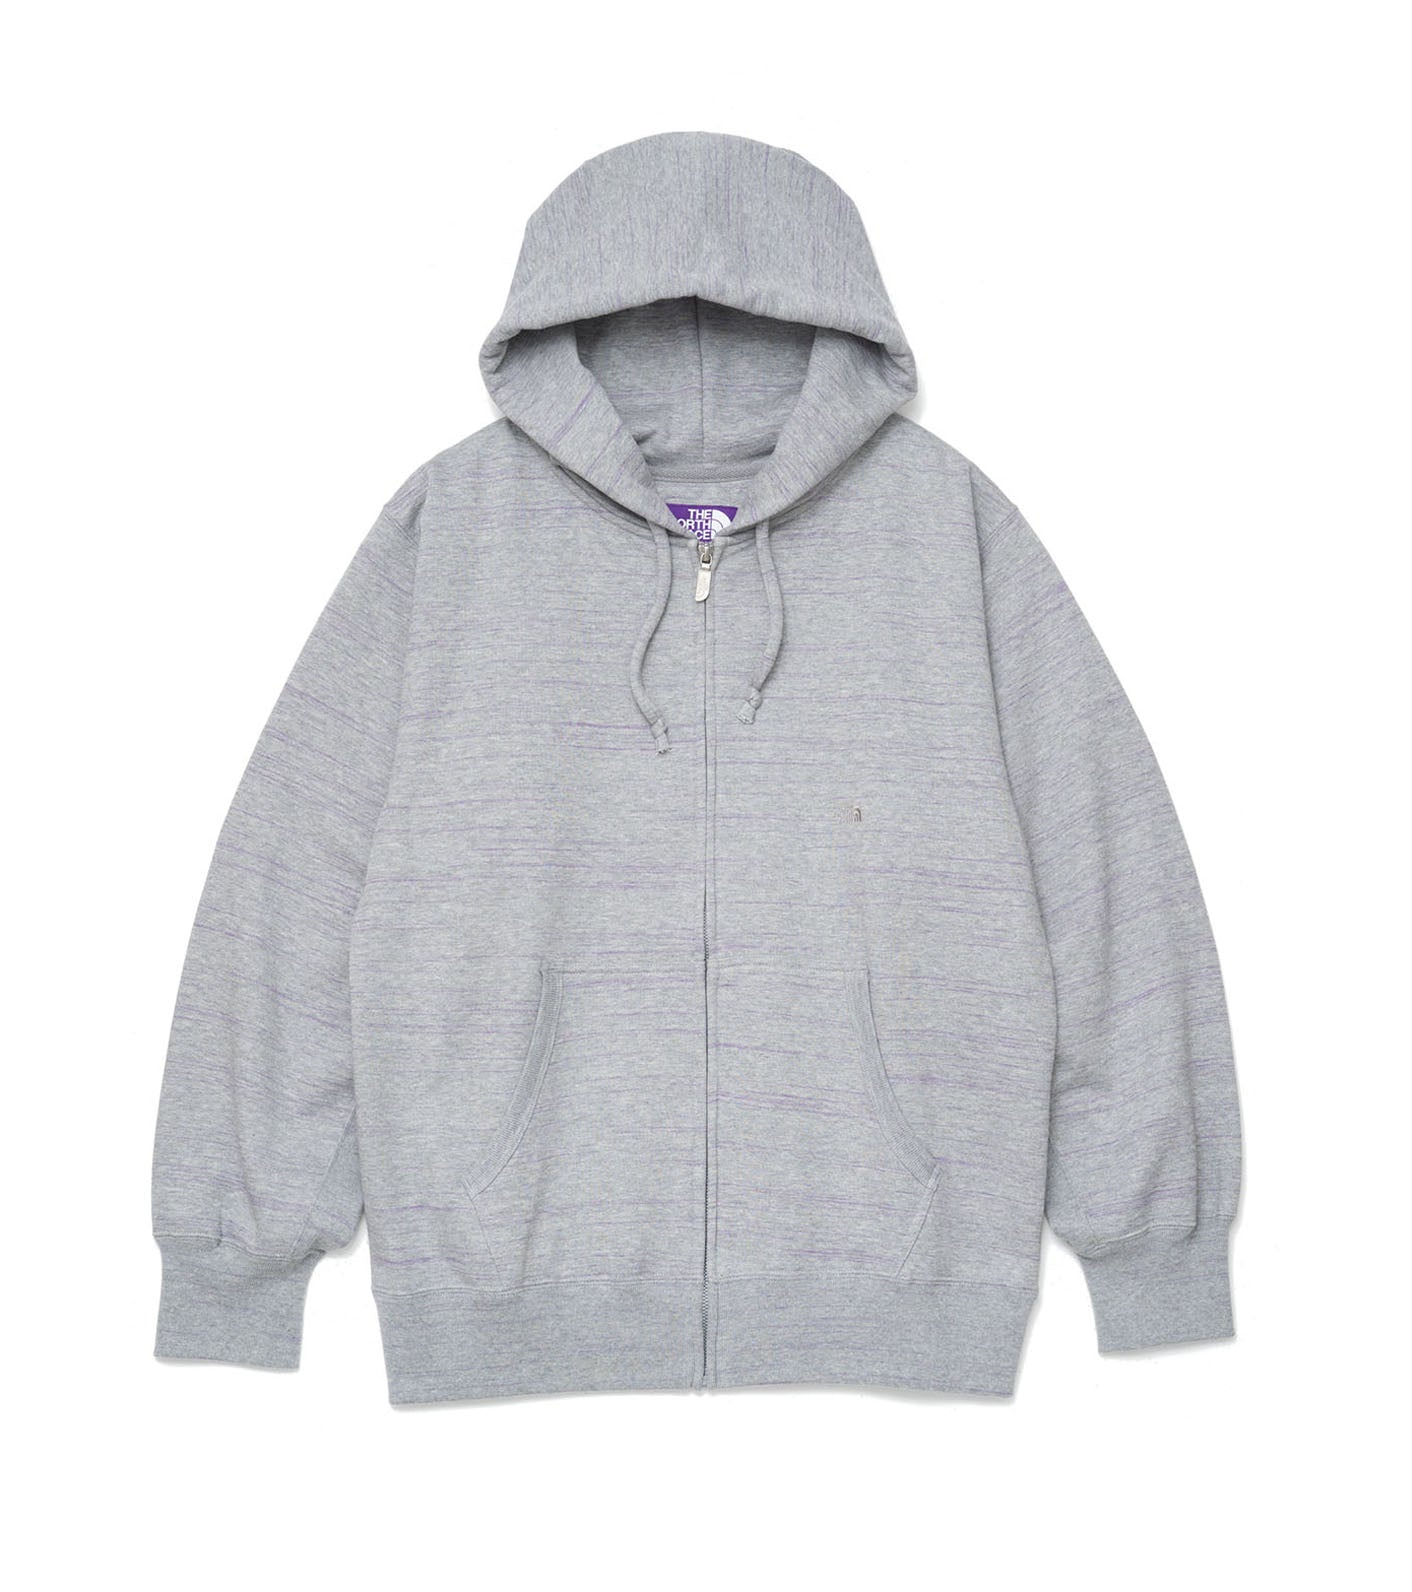 THE NORTH FACE PURPLE LABEL Front Zip Hoodie